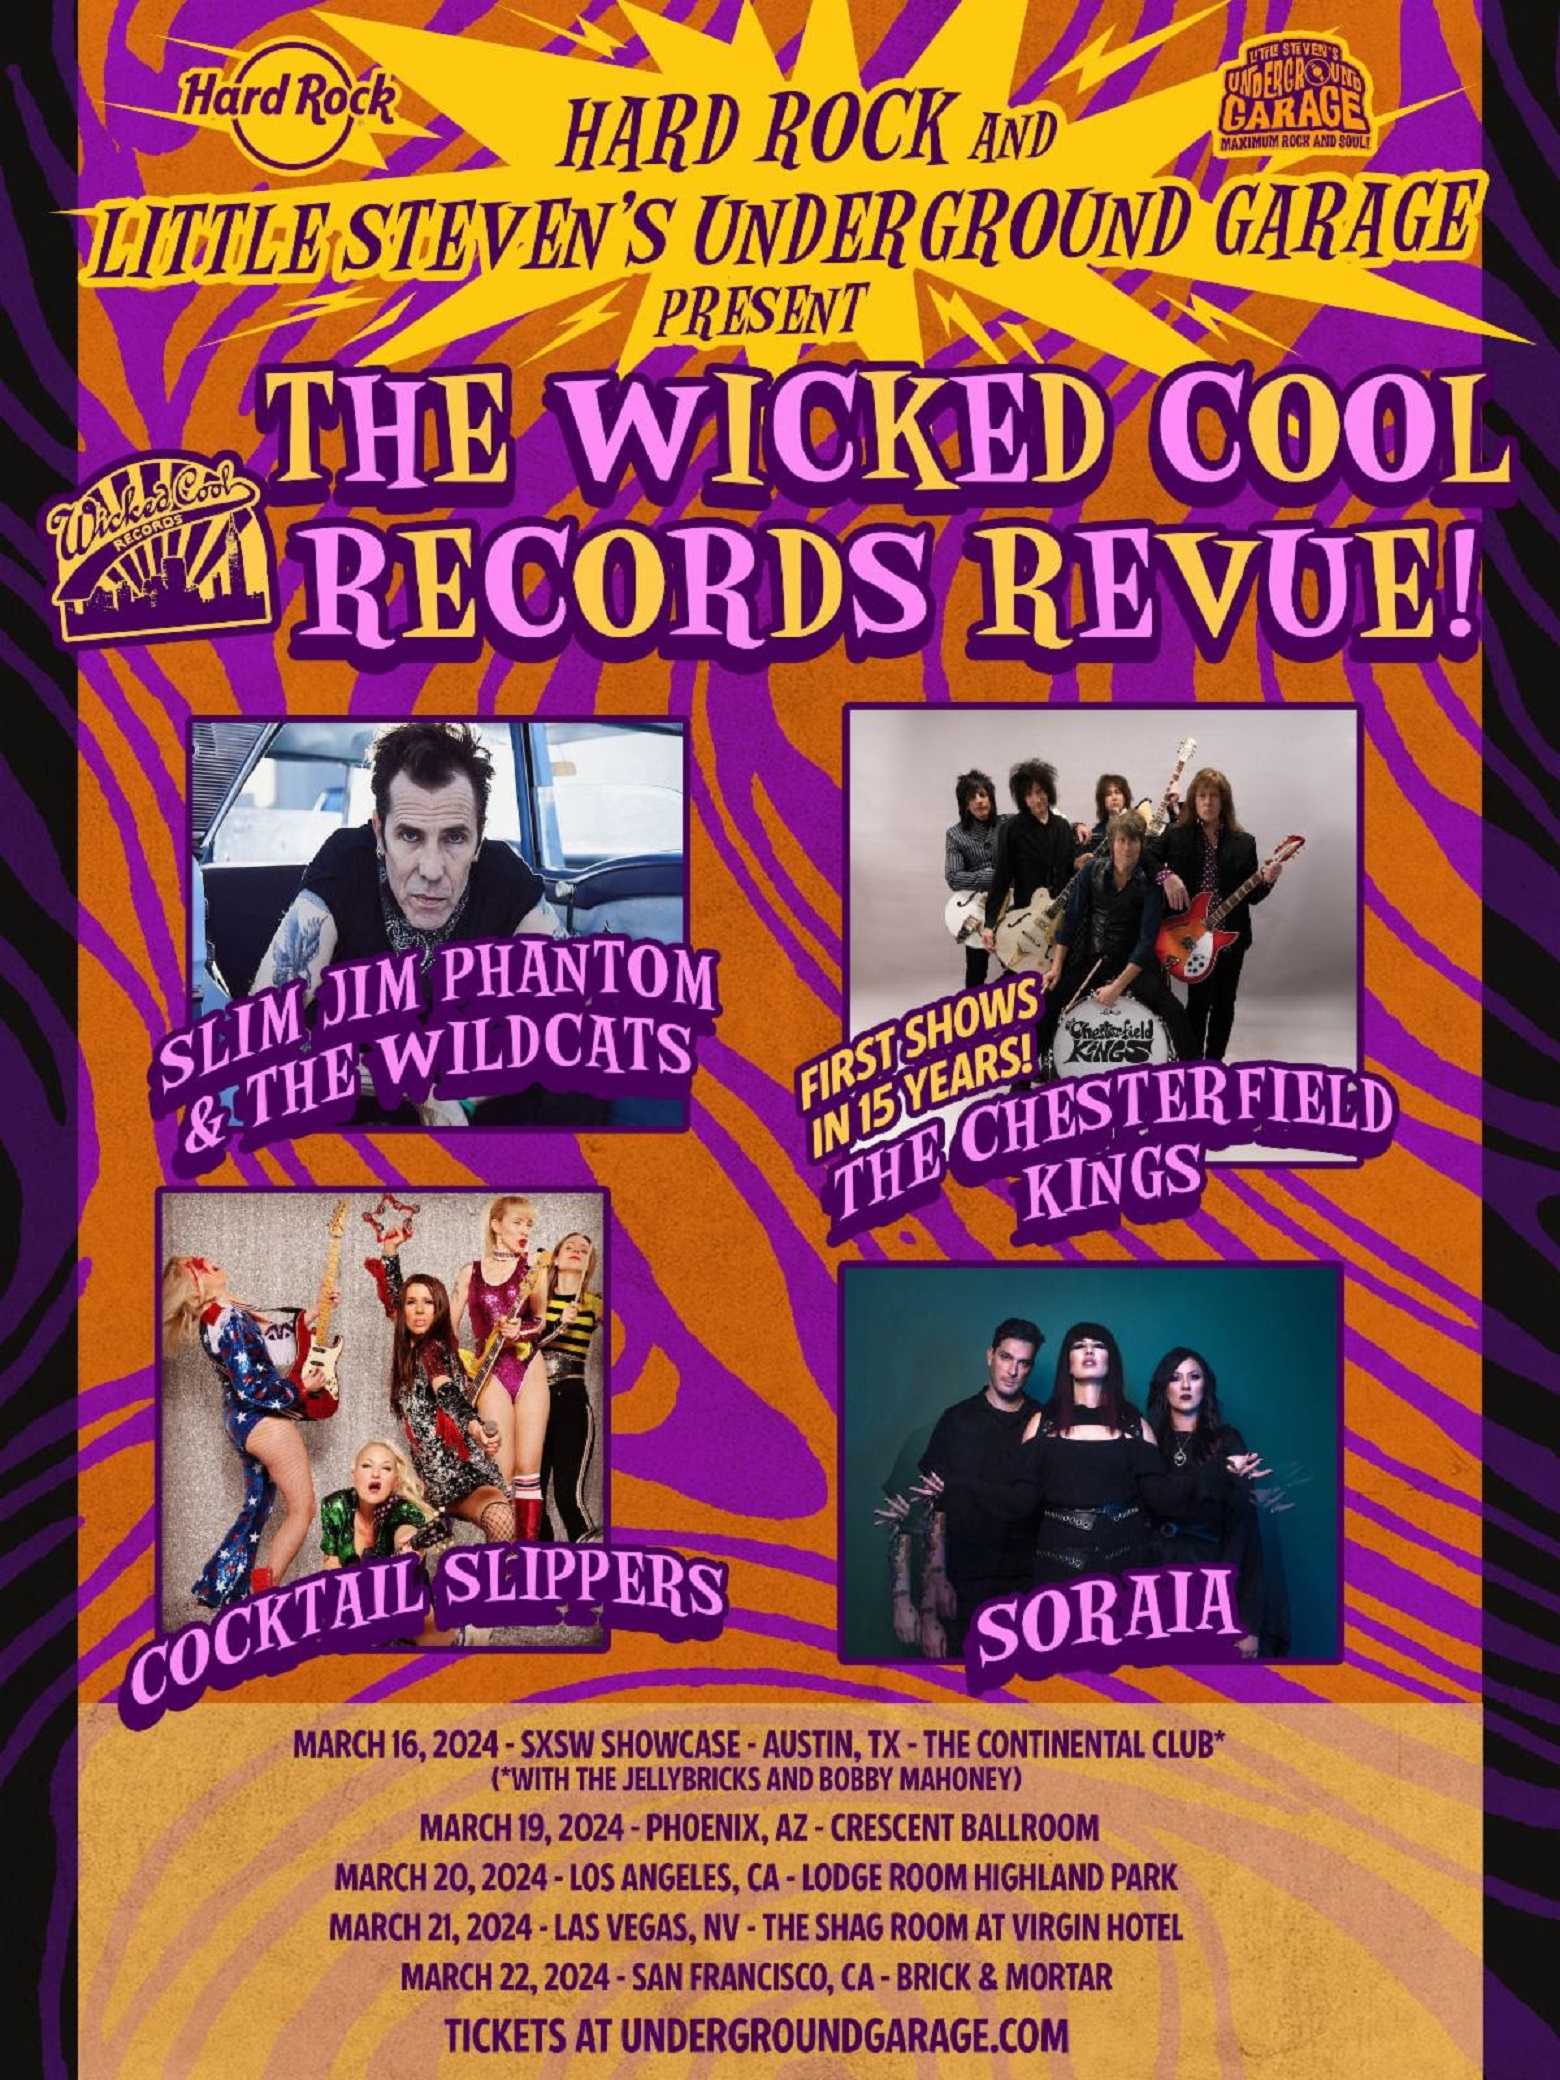 HARD ROCK AND LITTLE STEVEN’S UNDERGROUND GARAGE PRESENT THE WICKED COOL RECORDS REVUE!